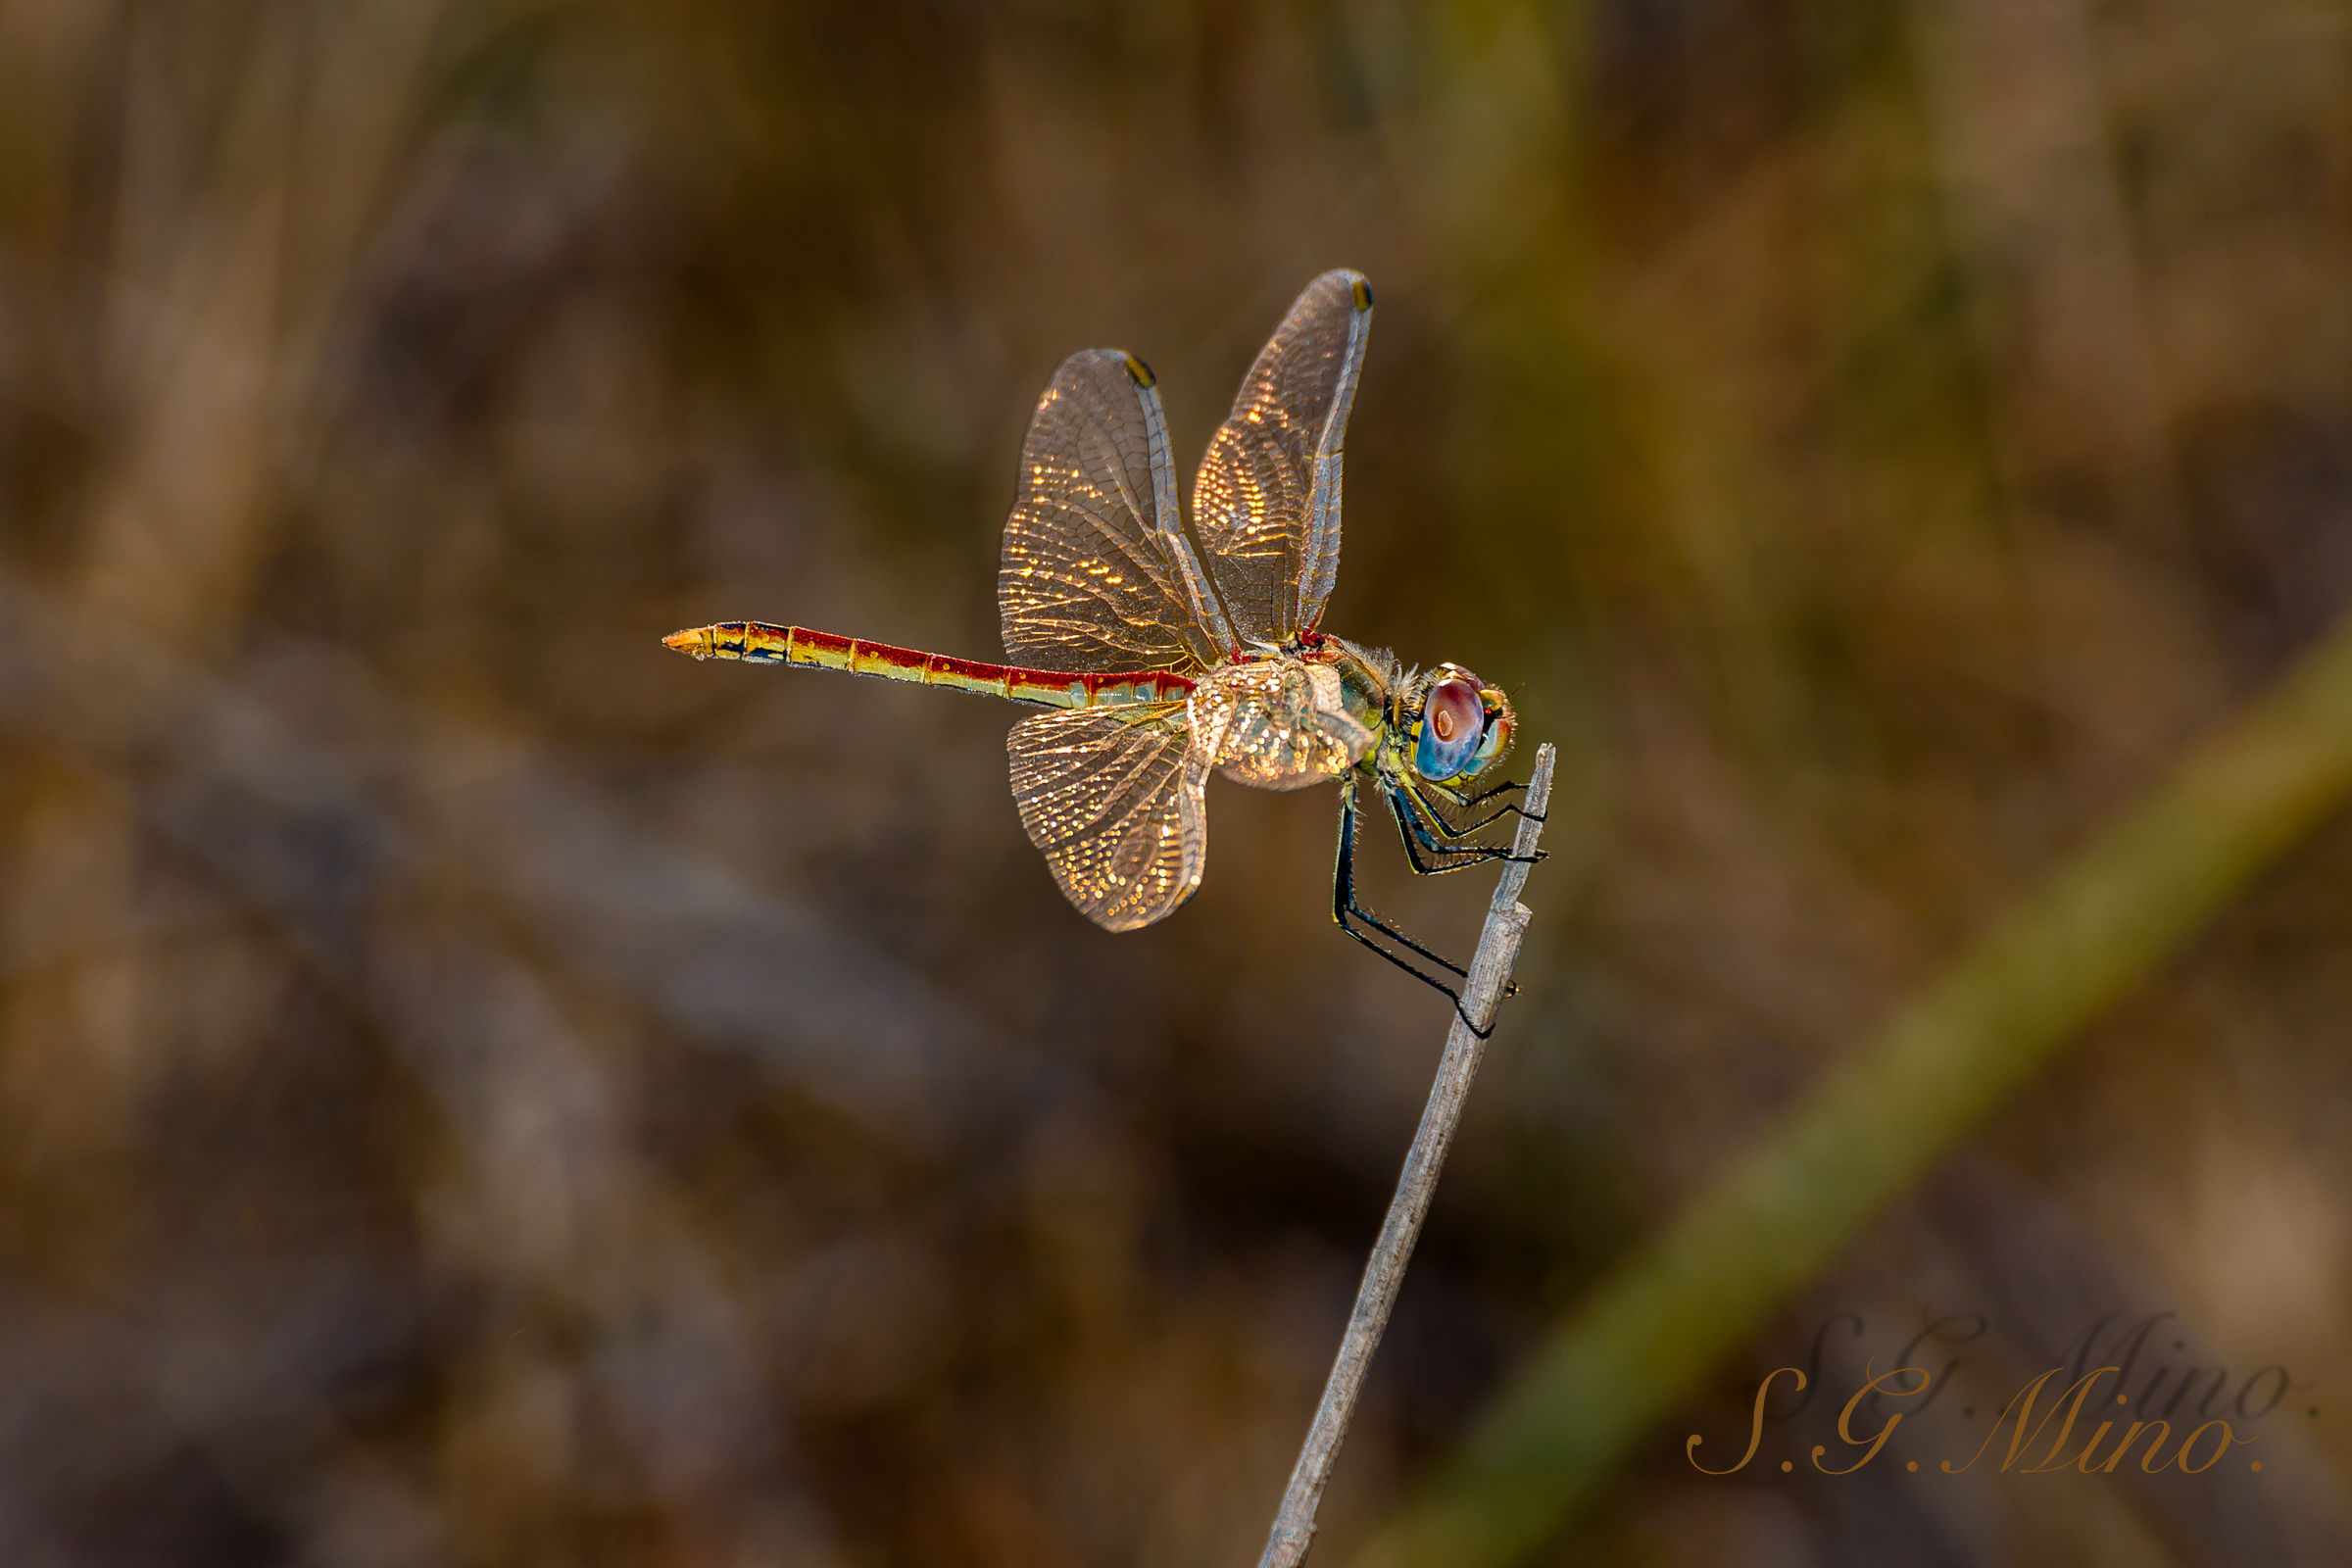 Dragonfly at sunset!...